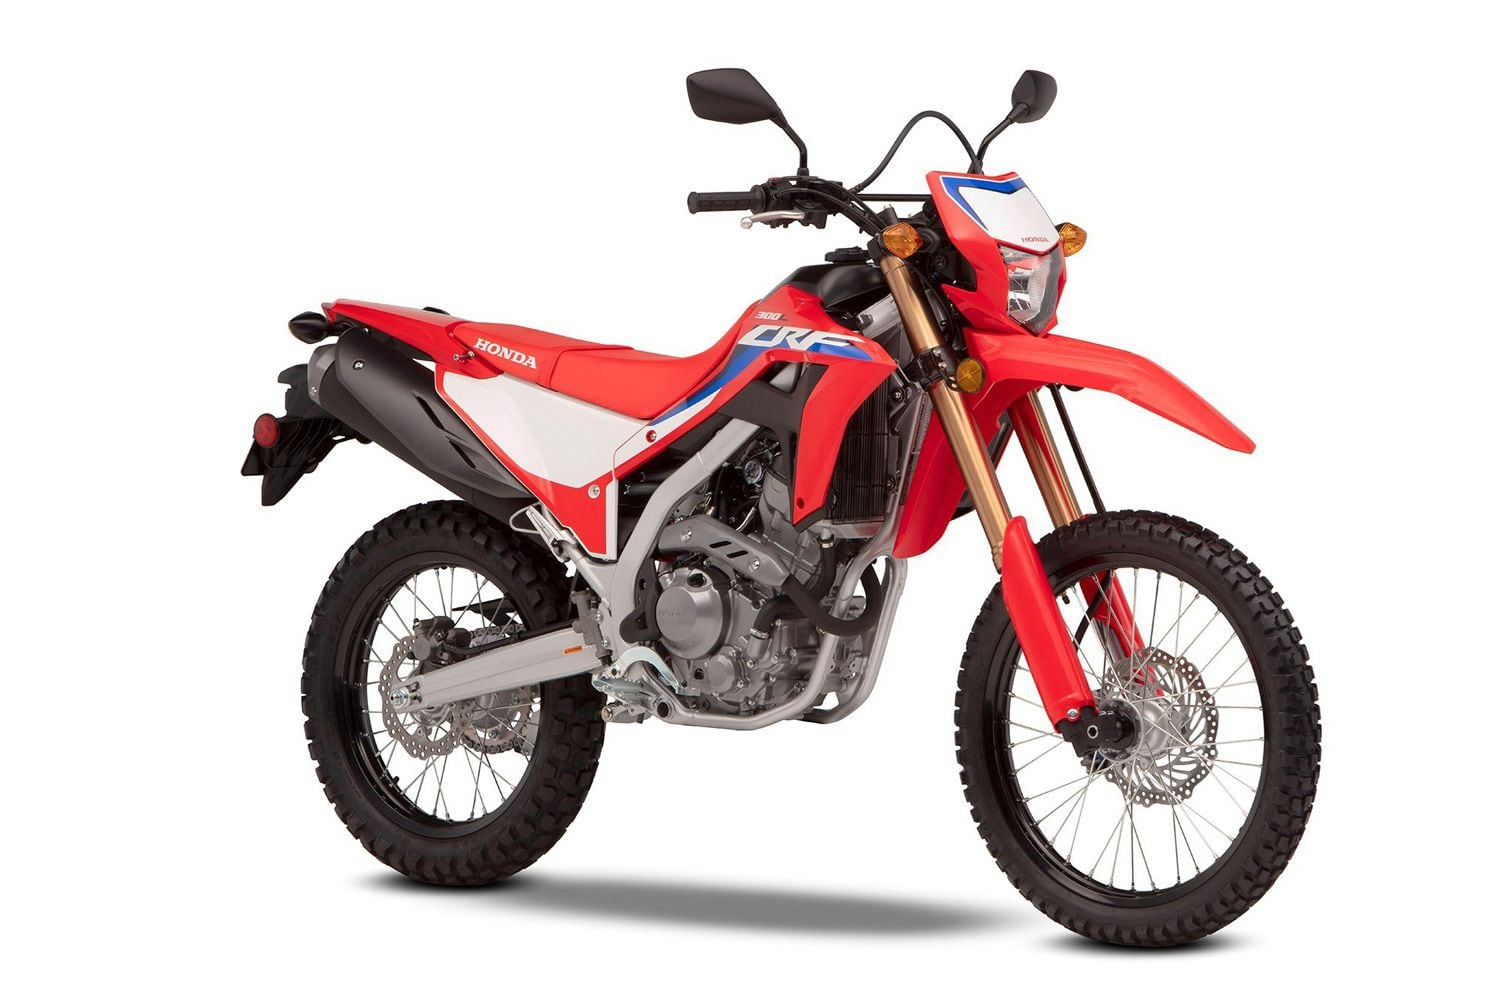 The 2021 Honda CRF300L is Euro 5 compliant.